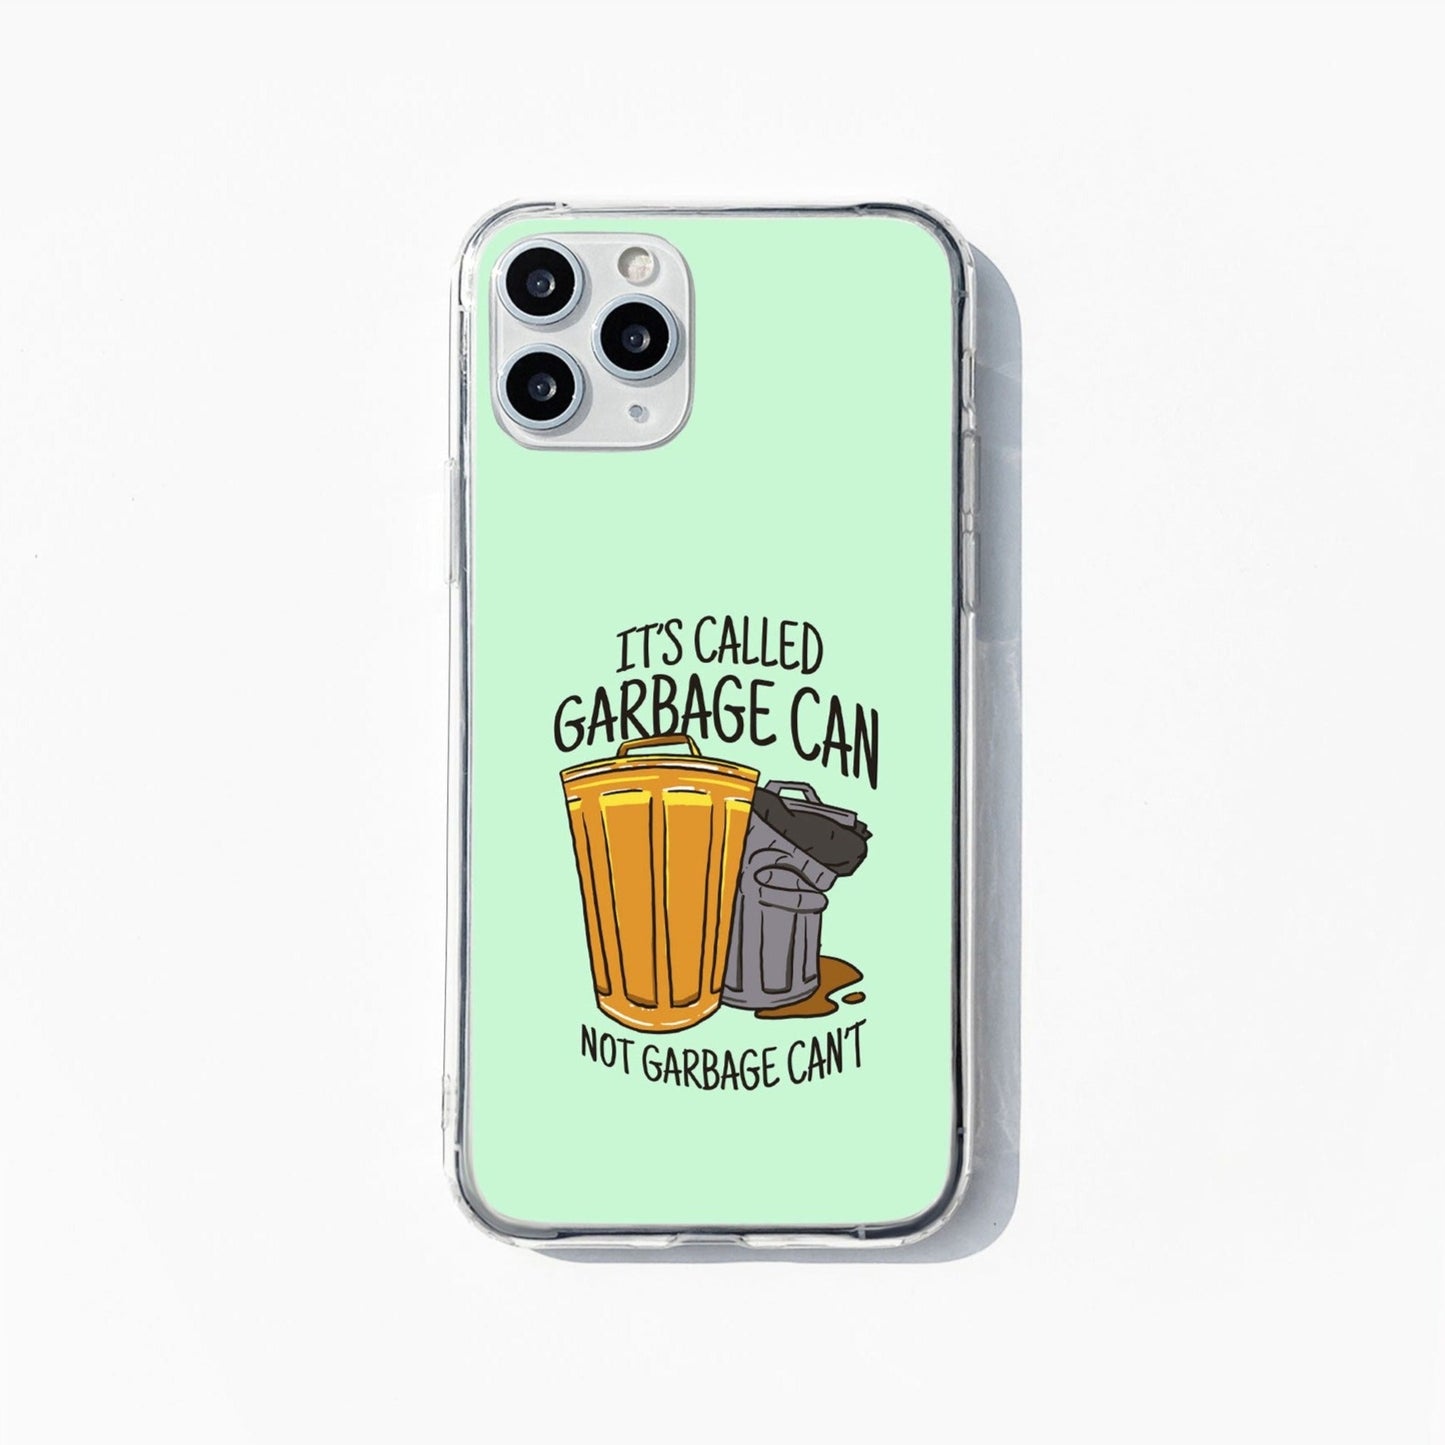 Garbage can't phone case